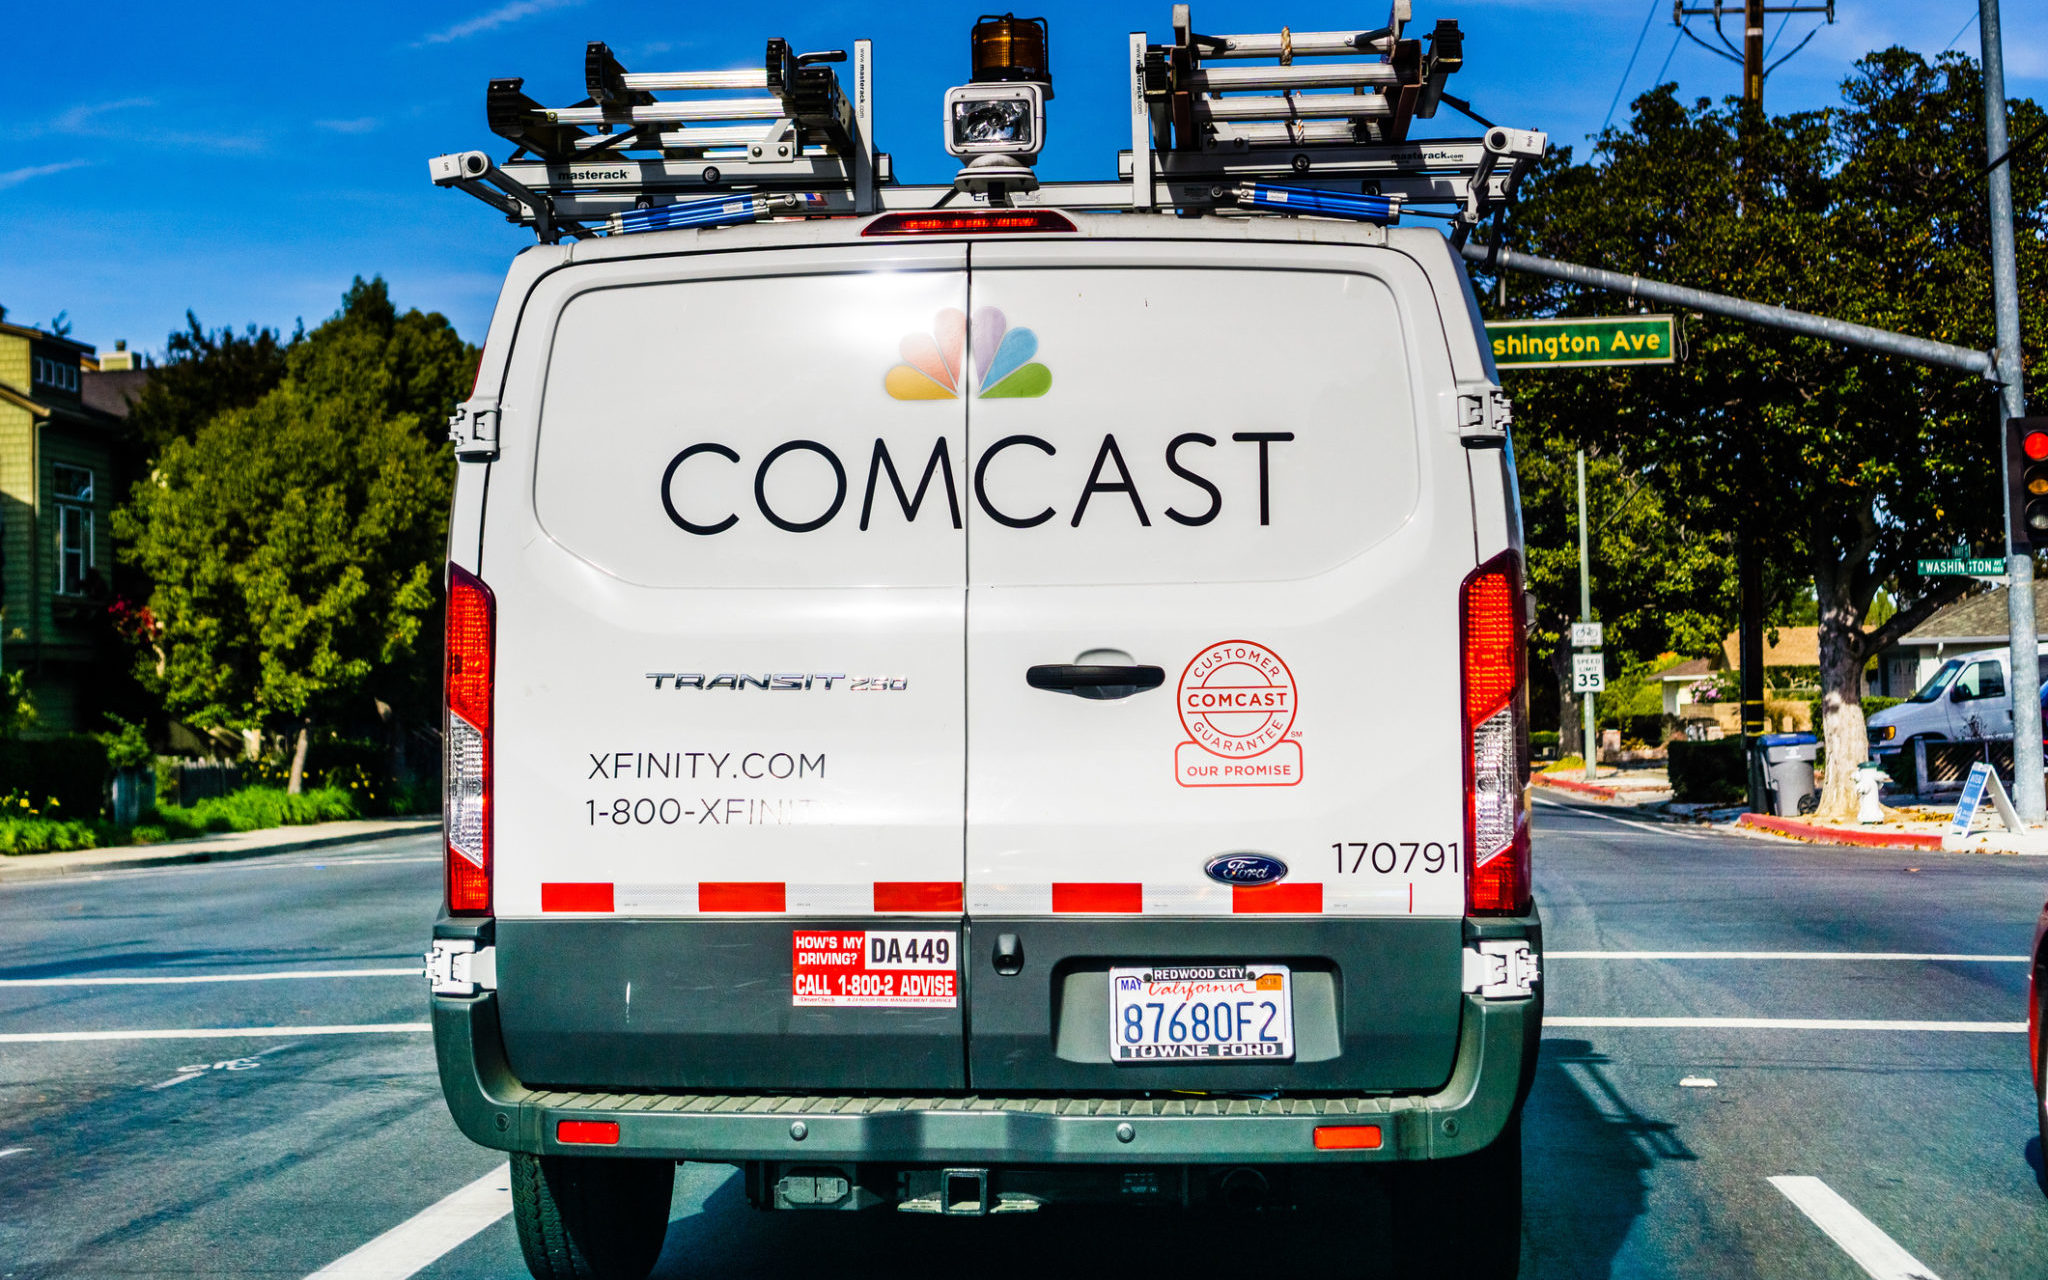 Cable TV Companies Like Comcast & Spectrum Represents Just 30.6% of All TV Viewing